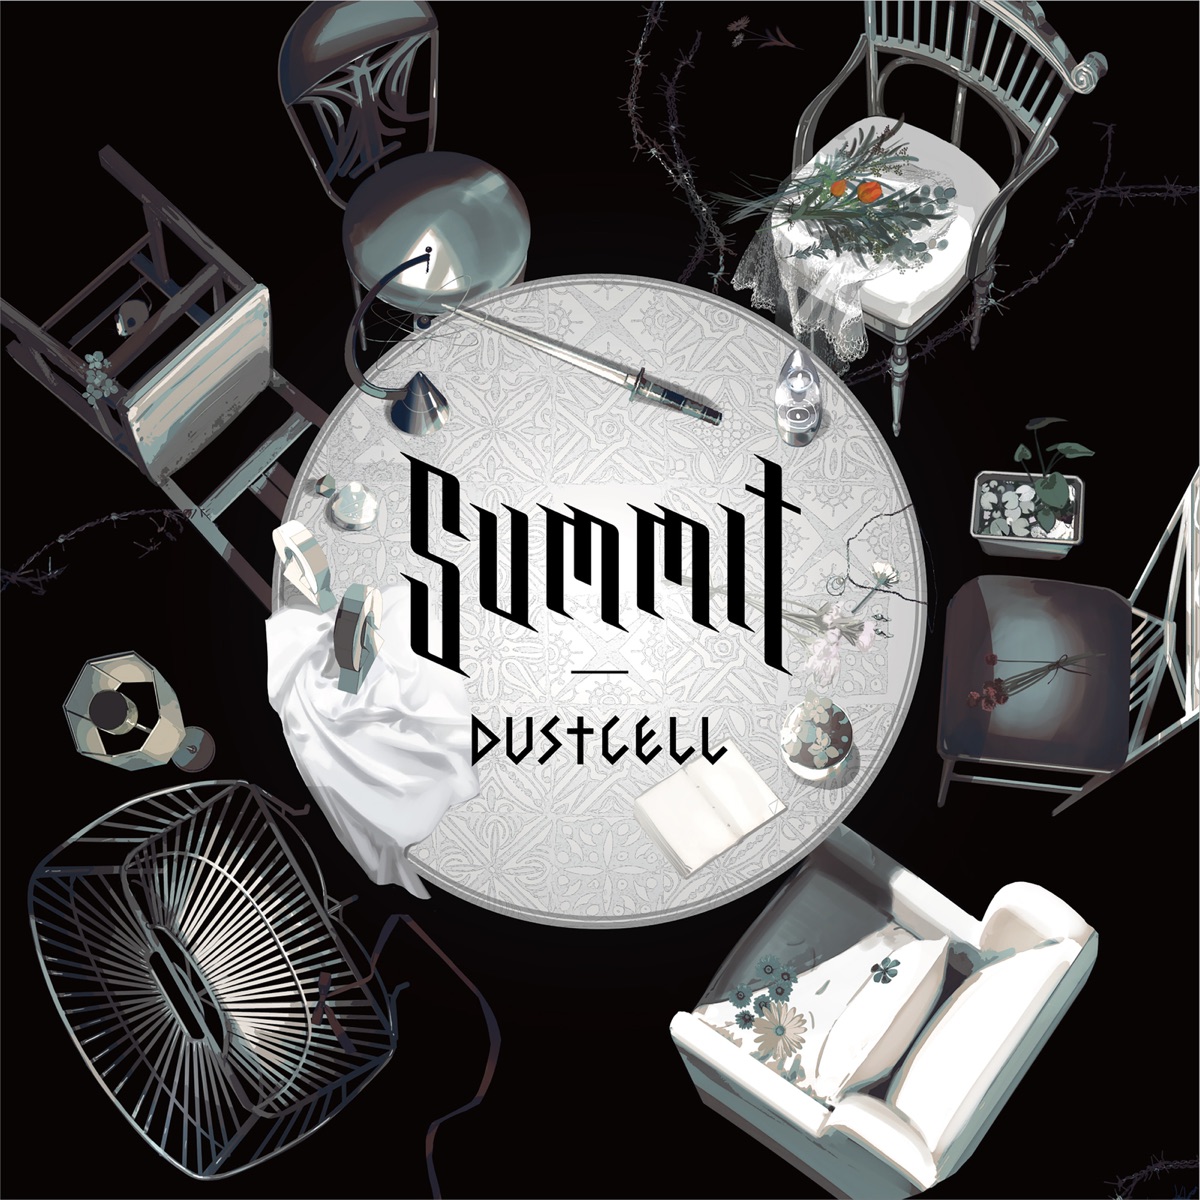 Cover for『DUSTCELL - ONE』from the release『SUMMIT』